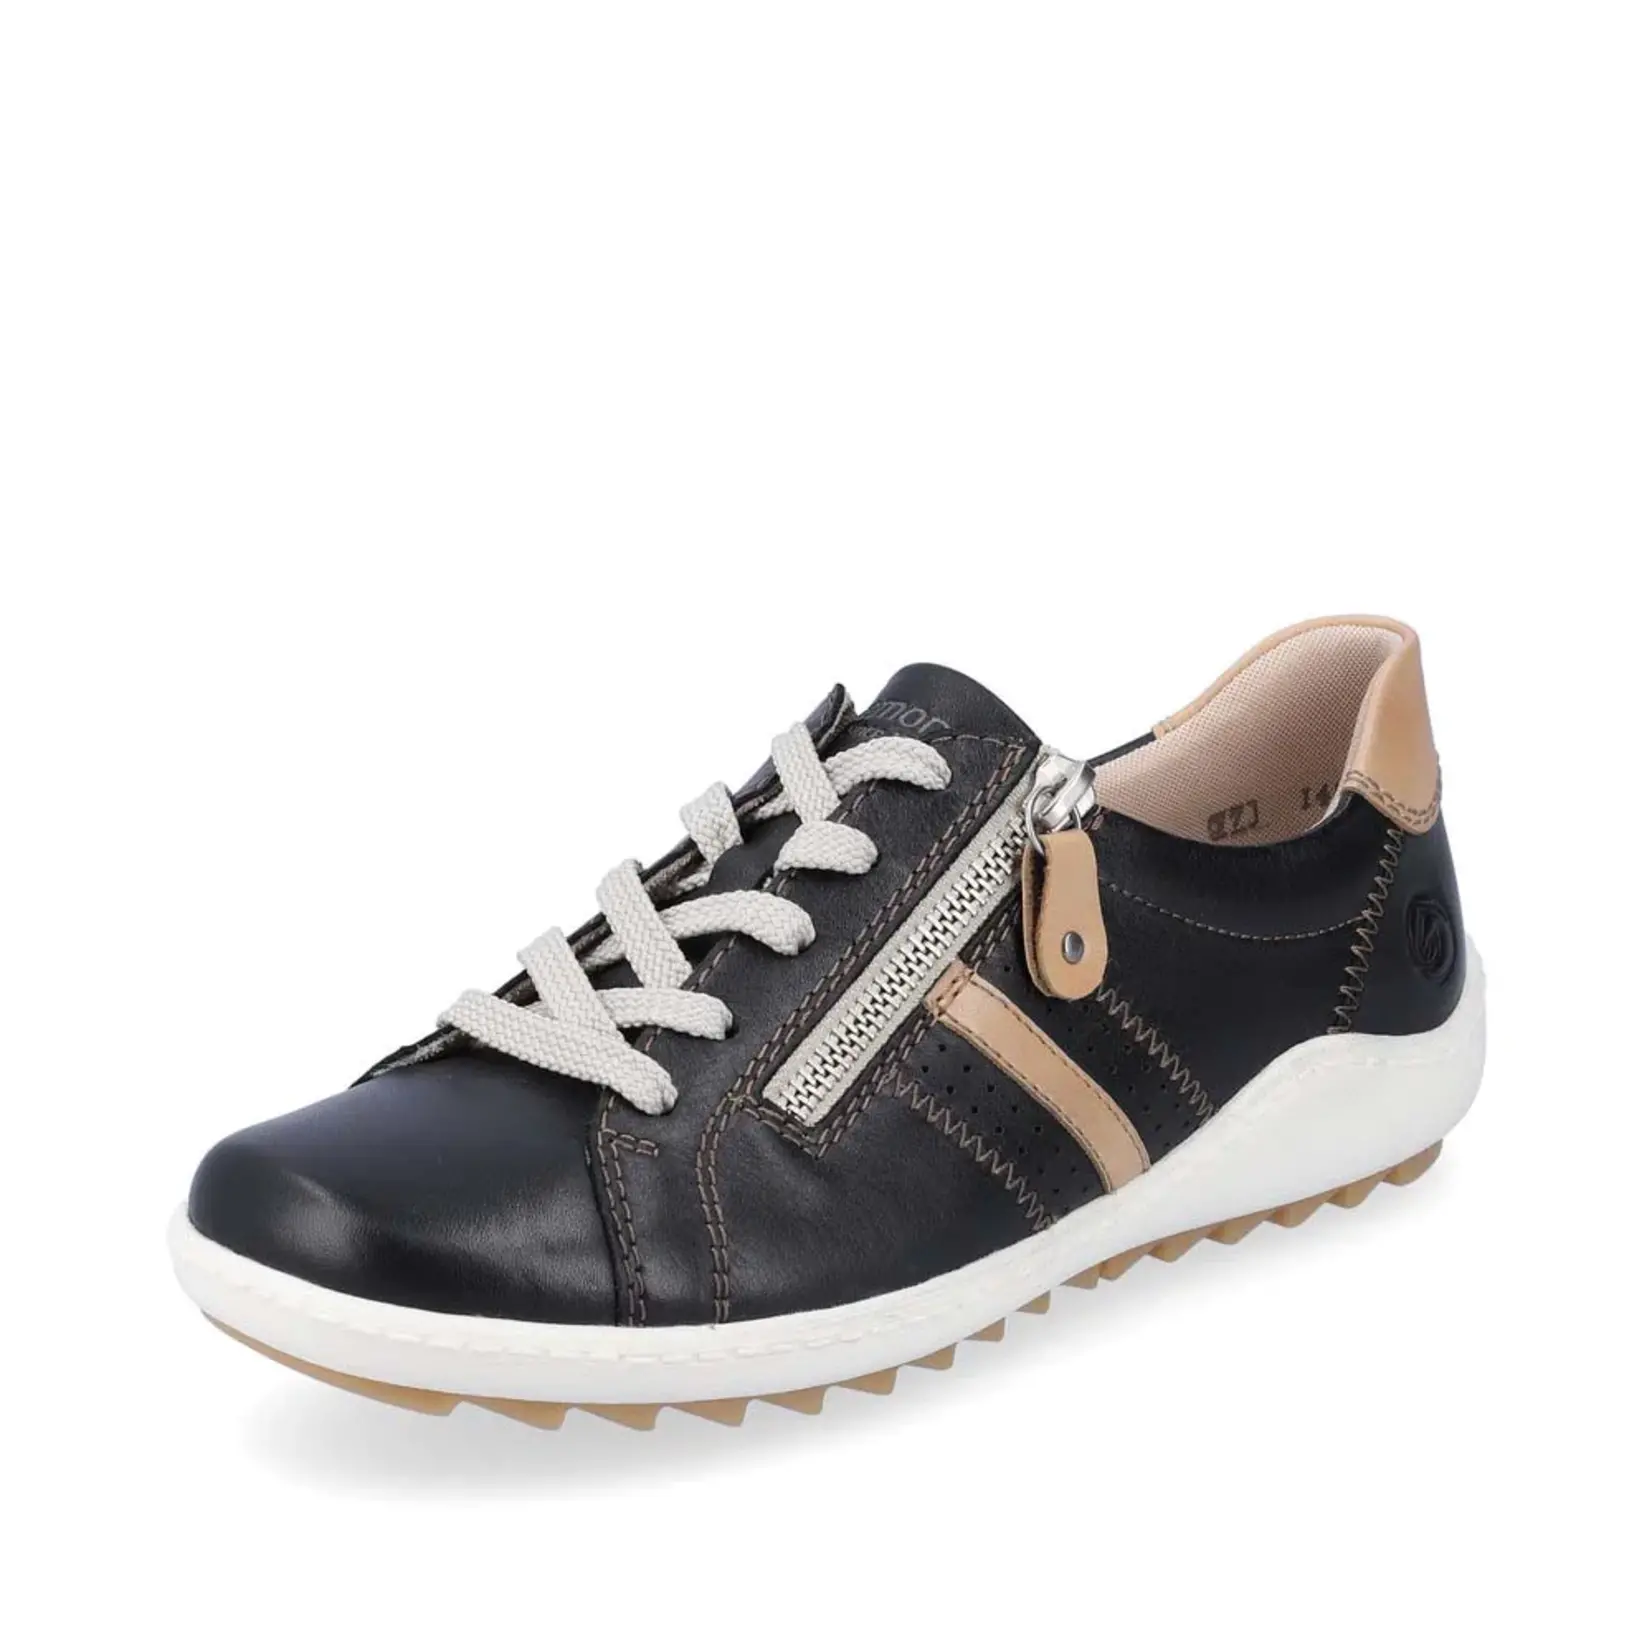 Remonte REMONTE R1432-01 Lace-Up Sneaker